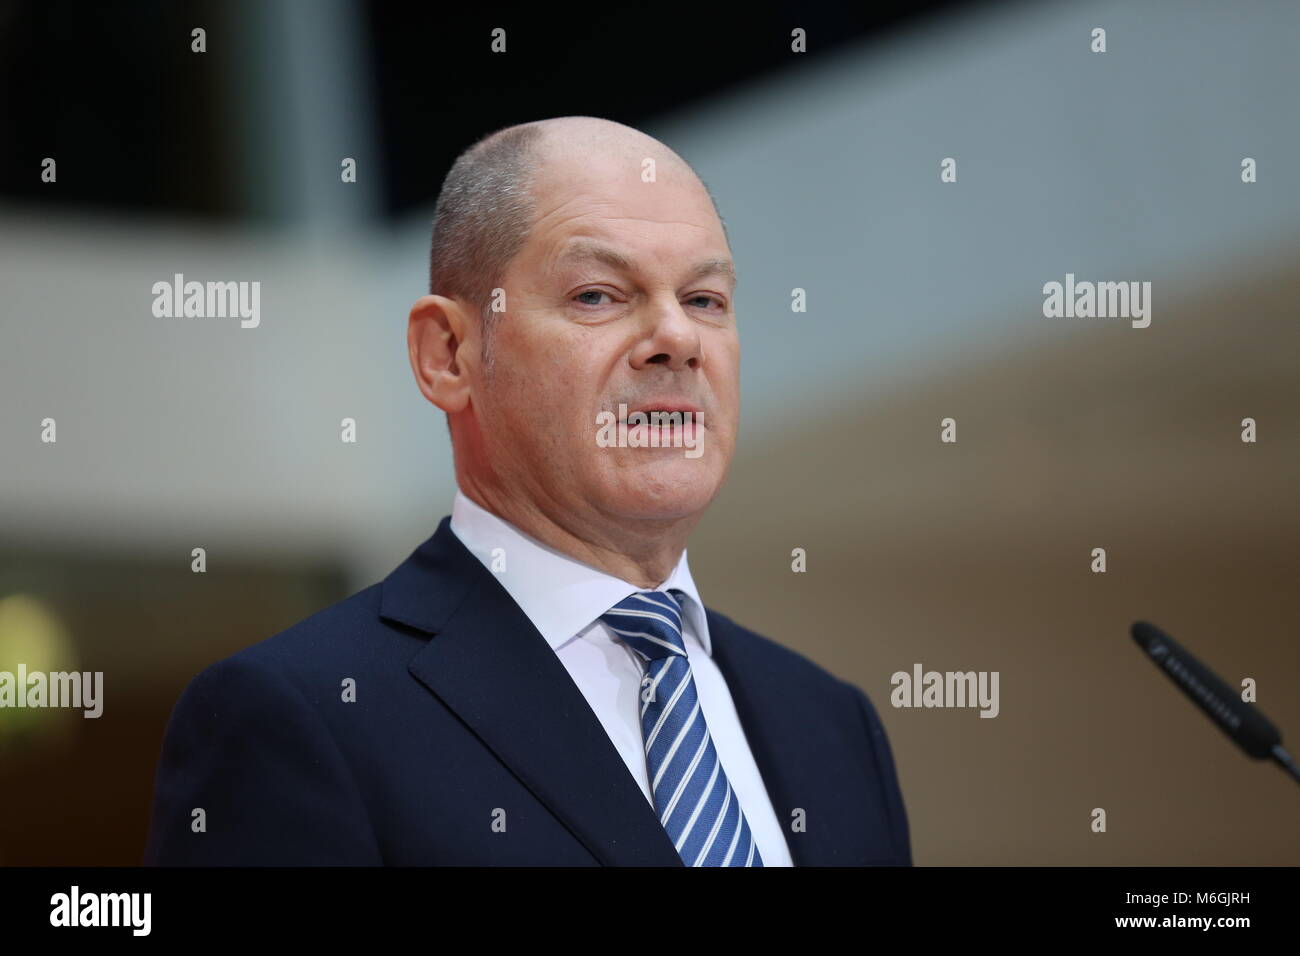 Berlin, Germany. 04th Mar, 2018. Olaf Scholz (SPD) at the press conference in the Willy-Brandt-Haus in Berlin-Kreuzberg. The majority of SPD members have approved a new edition of the Grand Coalition with the CDU and CSU. 66.02 percent voted yes, said the SPD Federal Treasurer Dietmar Nietan at a press conference in the Willy Brandt House in Berlin. Around 463,000 SPD members were called to vote. Acting Party Chairman Olaf Scholz said that the membership poll process had brought the party together. Credit: Simone Kuhlmey/Pacific Press/Alamy Live News Stock Photo